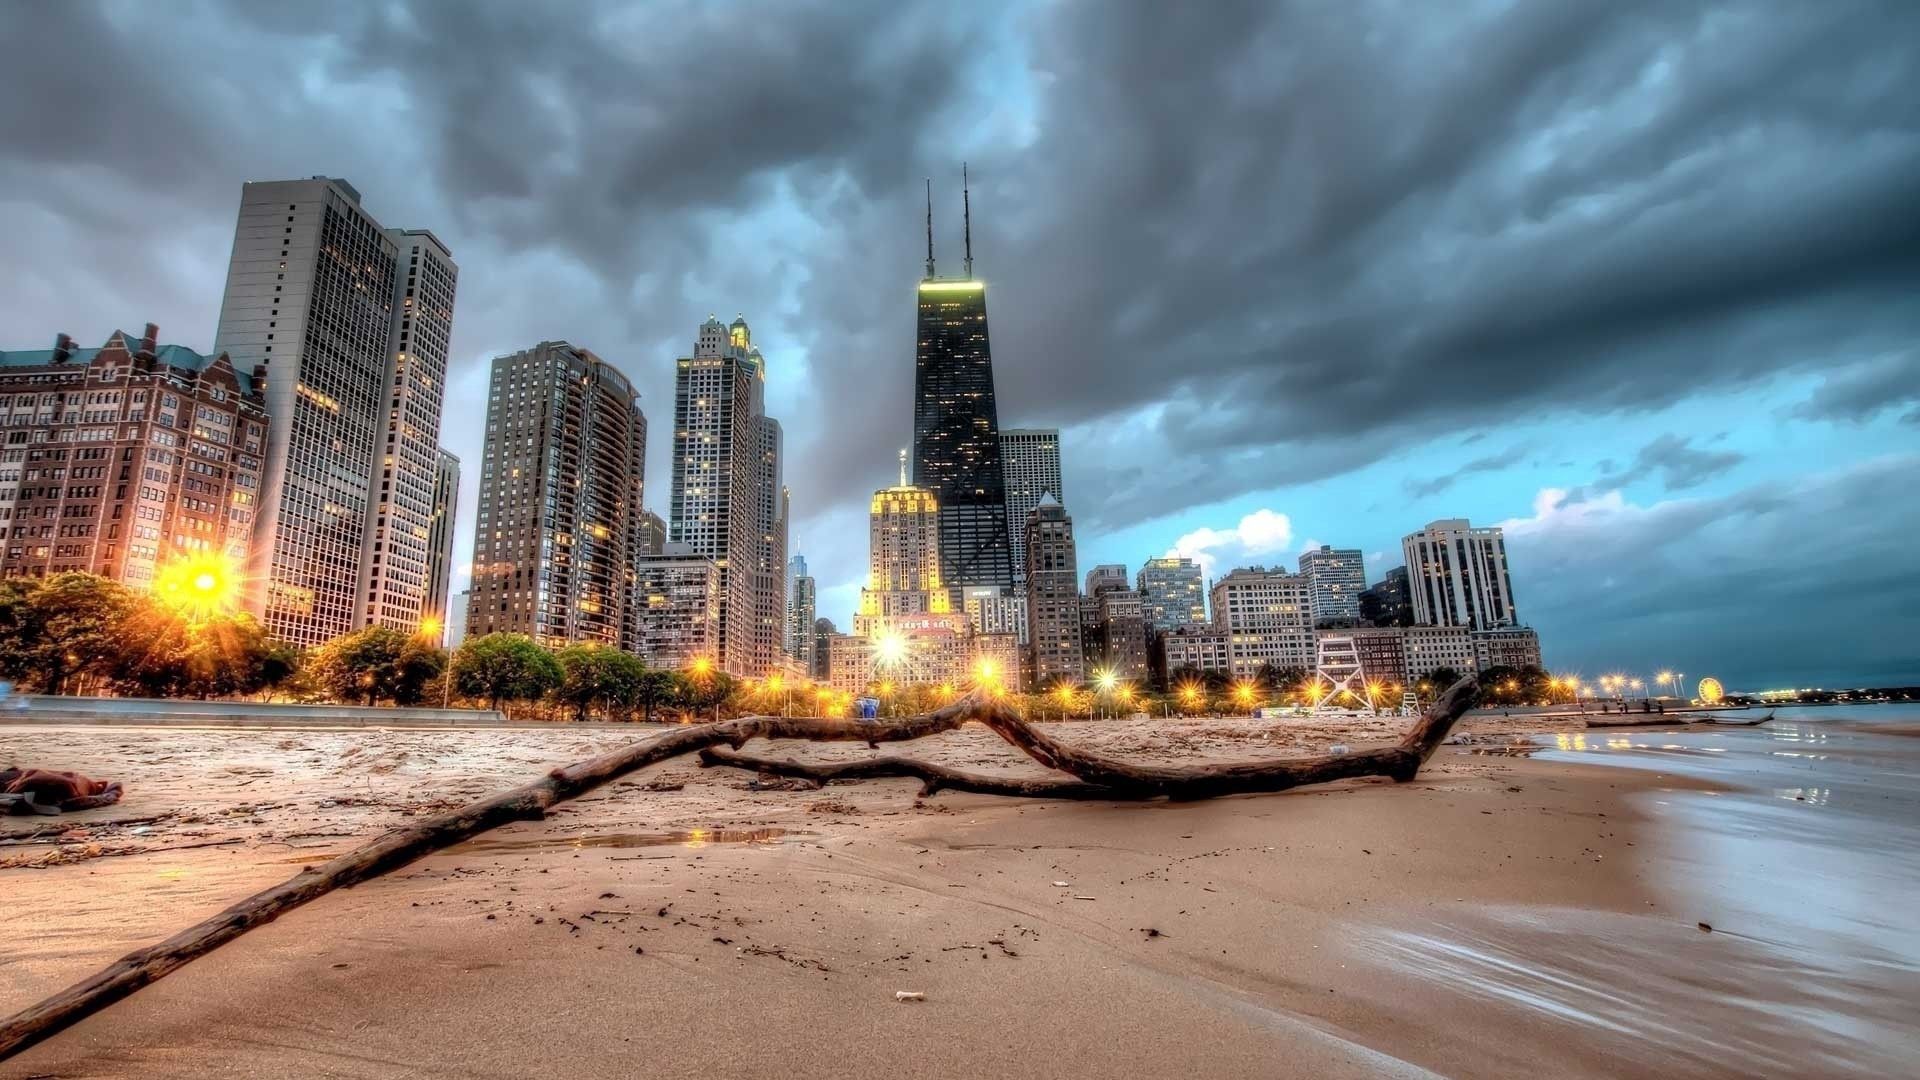 59639 download wallpaper cities, skyscraper, shore, bank, chicago screensavers and pictures for free